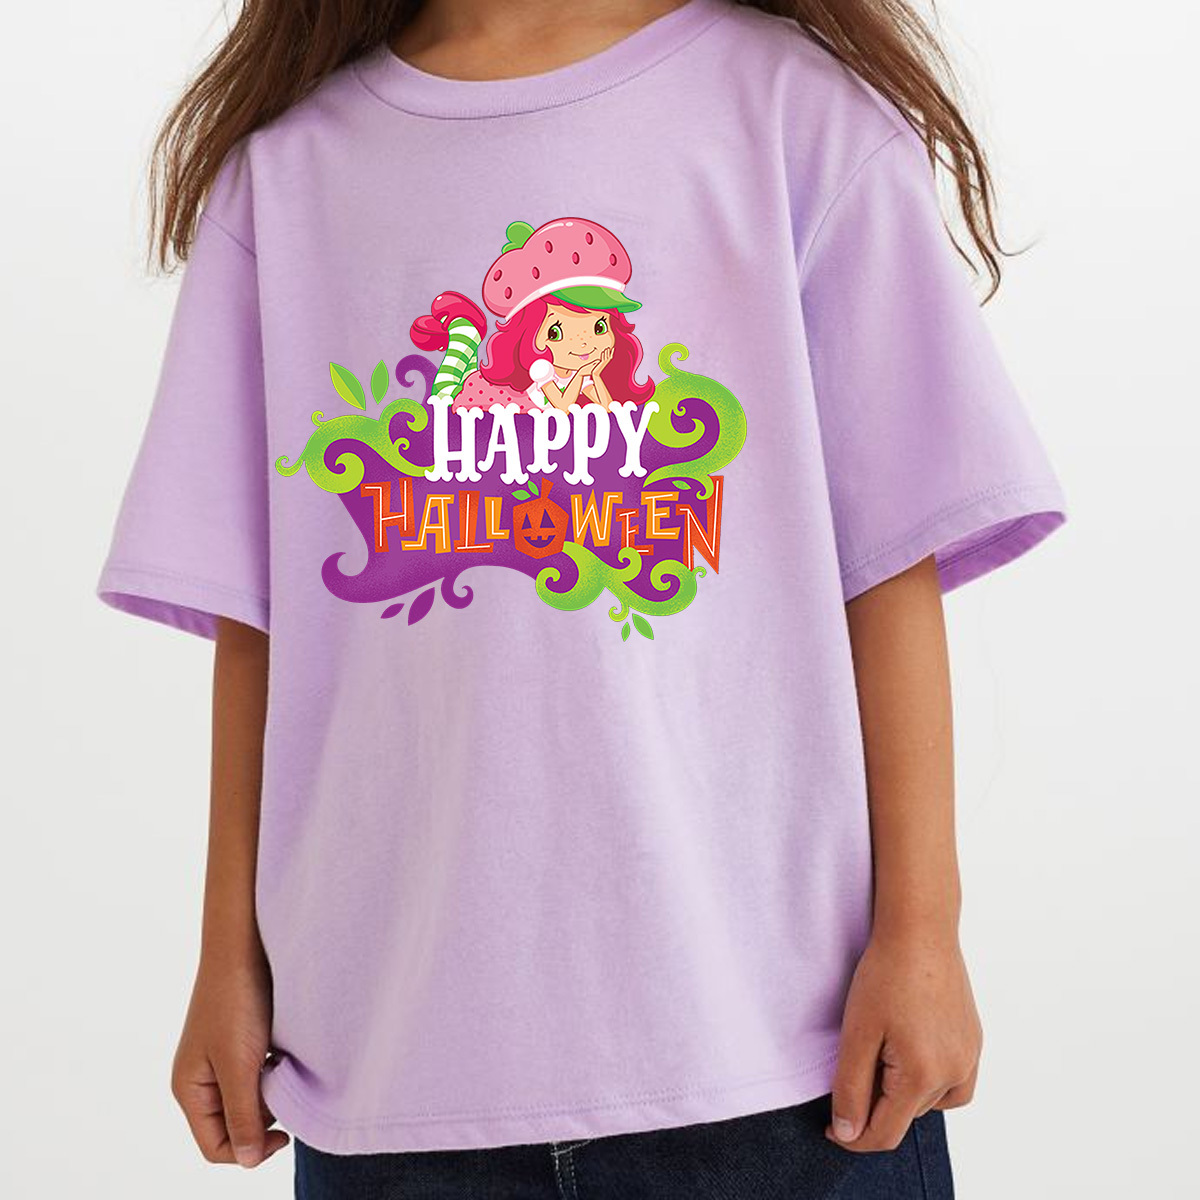 Strawberry Shortcake 1980s Proud Cat Lady Shirt, Strawberry Shortcake Strawberry Pie Custard Shirt, Made in the 80s Shirt